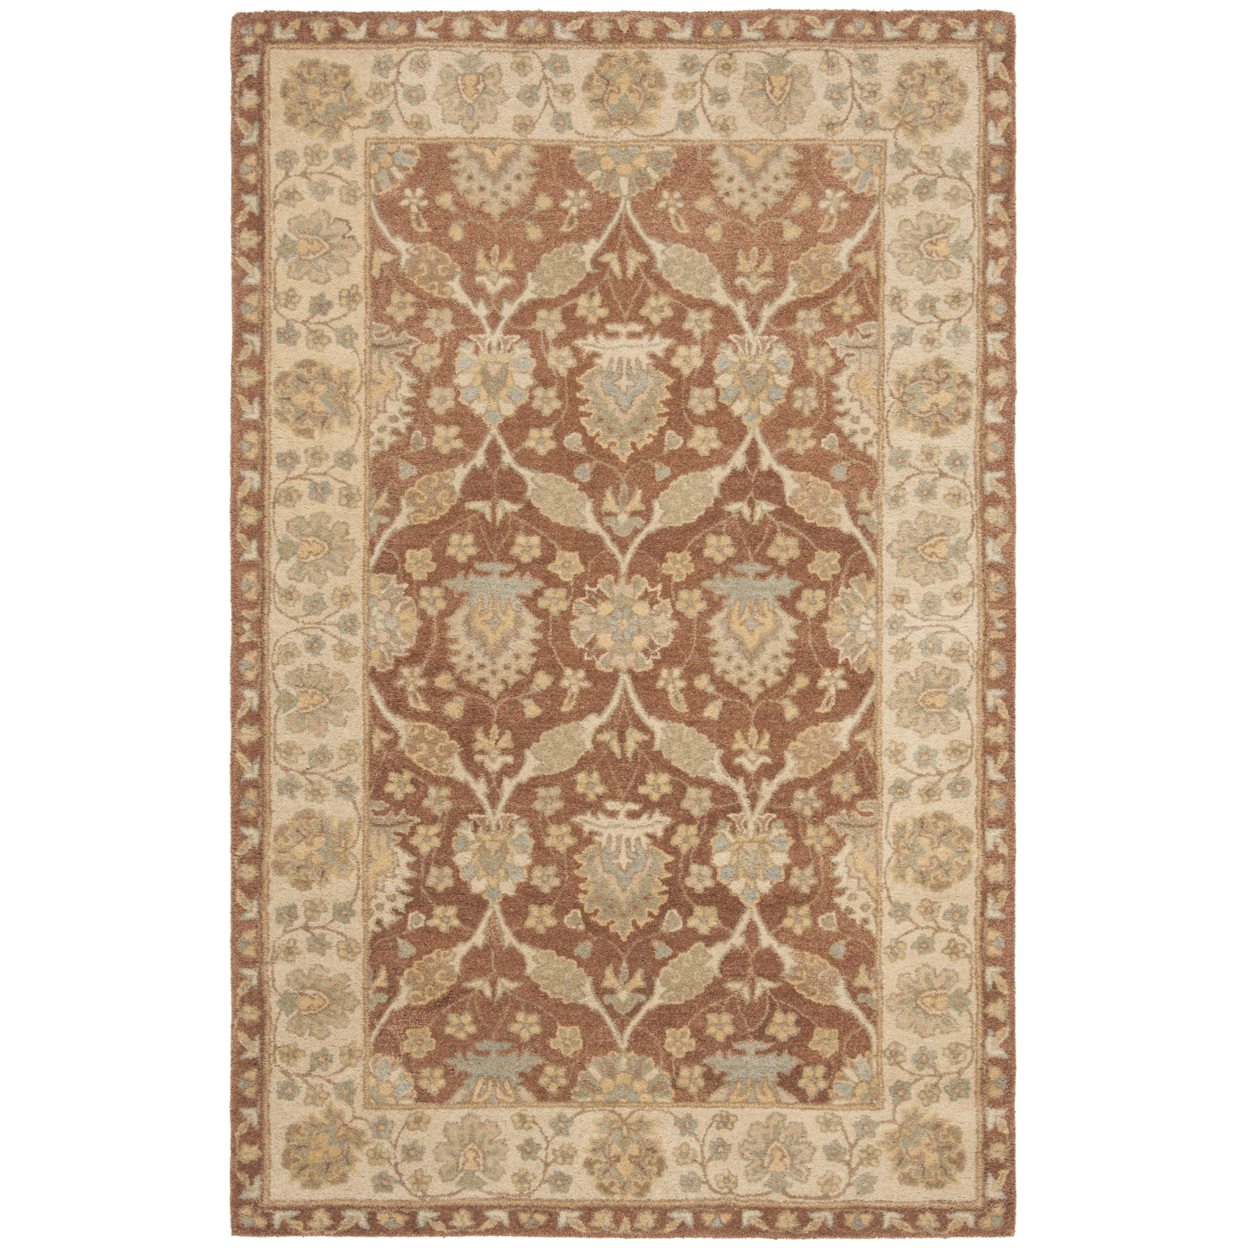 SAFAVIEH Antiquity AT315A Handmade Brown / Taupe Rug - 4' X 6'